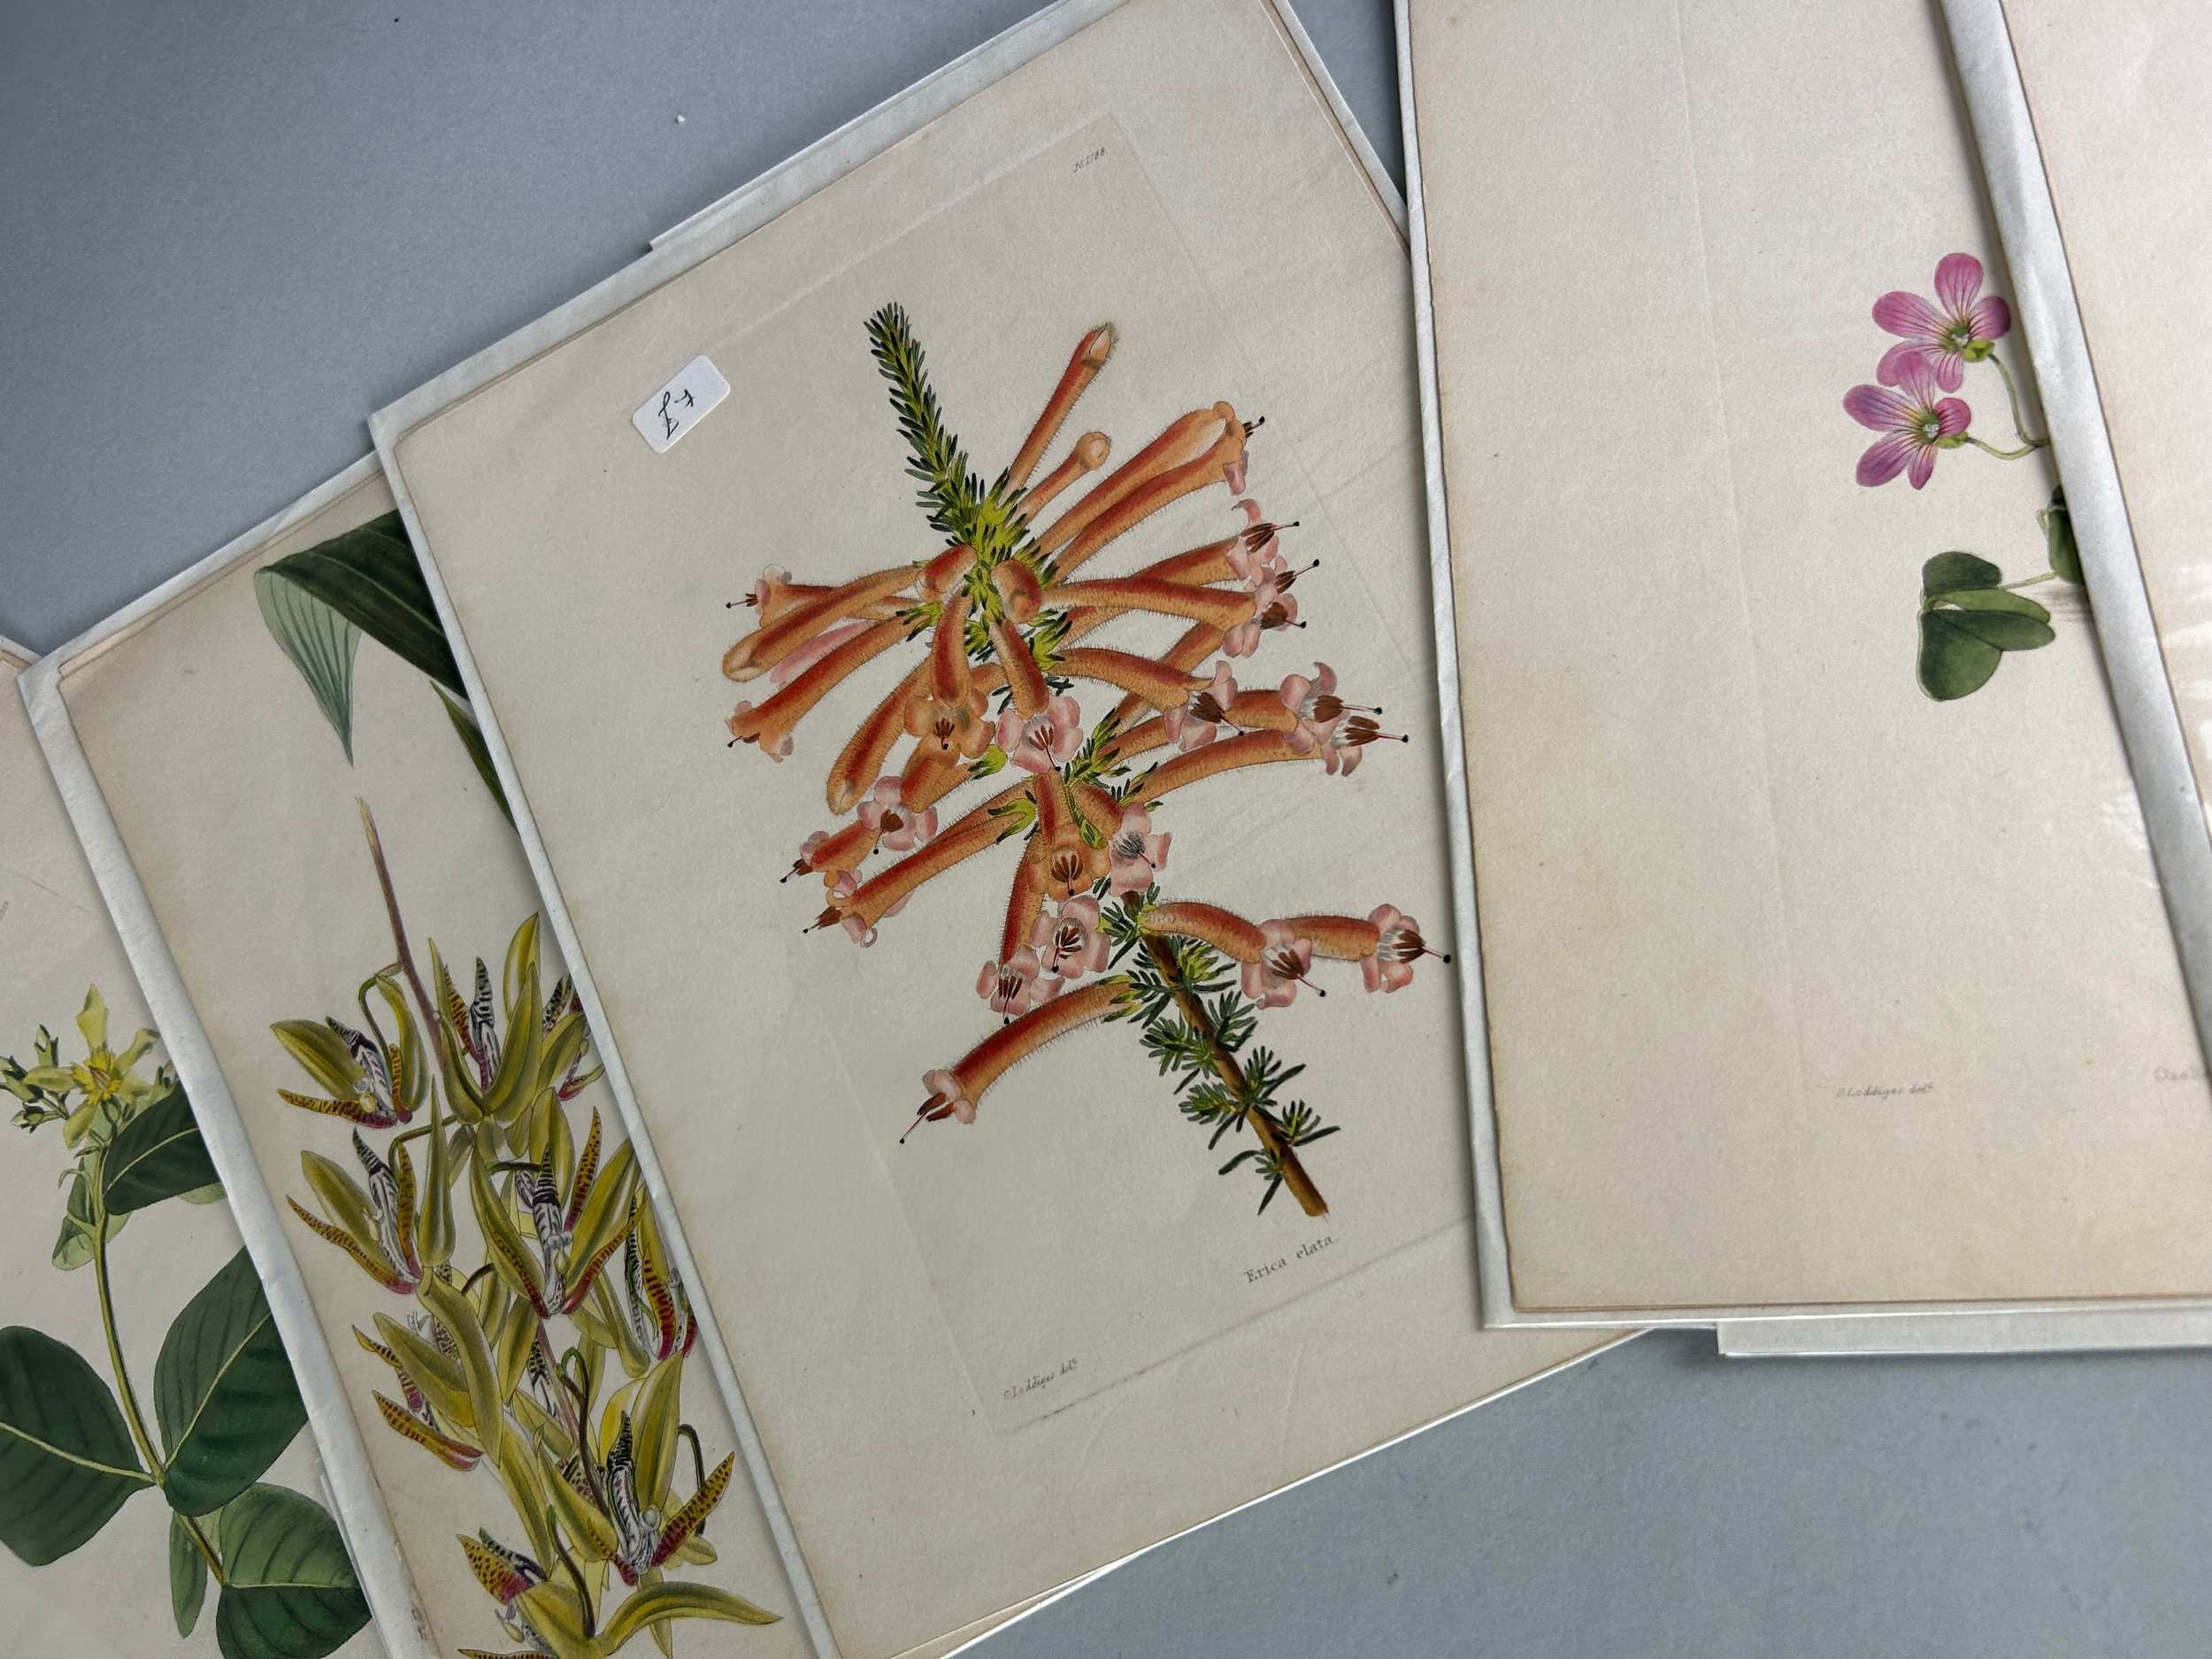 GEORGE LODDIGES (1786-1846) A LARGE COLLECTION OF BOTANICAL HAND COLOURED PLATES OF FLOWERS AND - Image 2 of 7